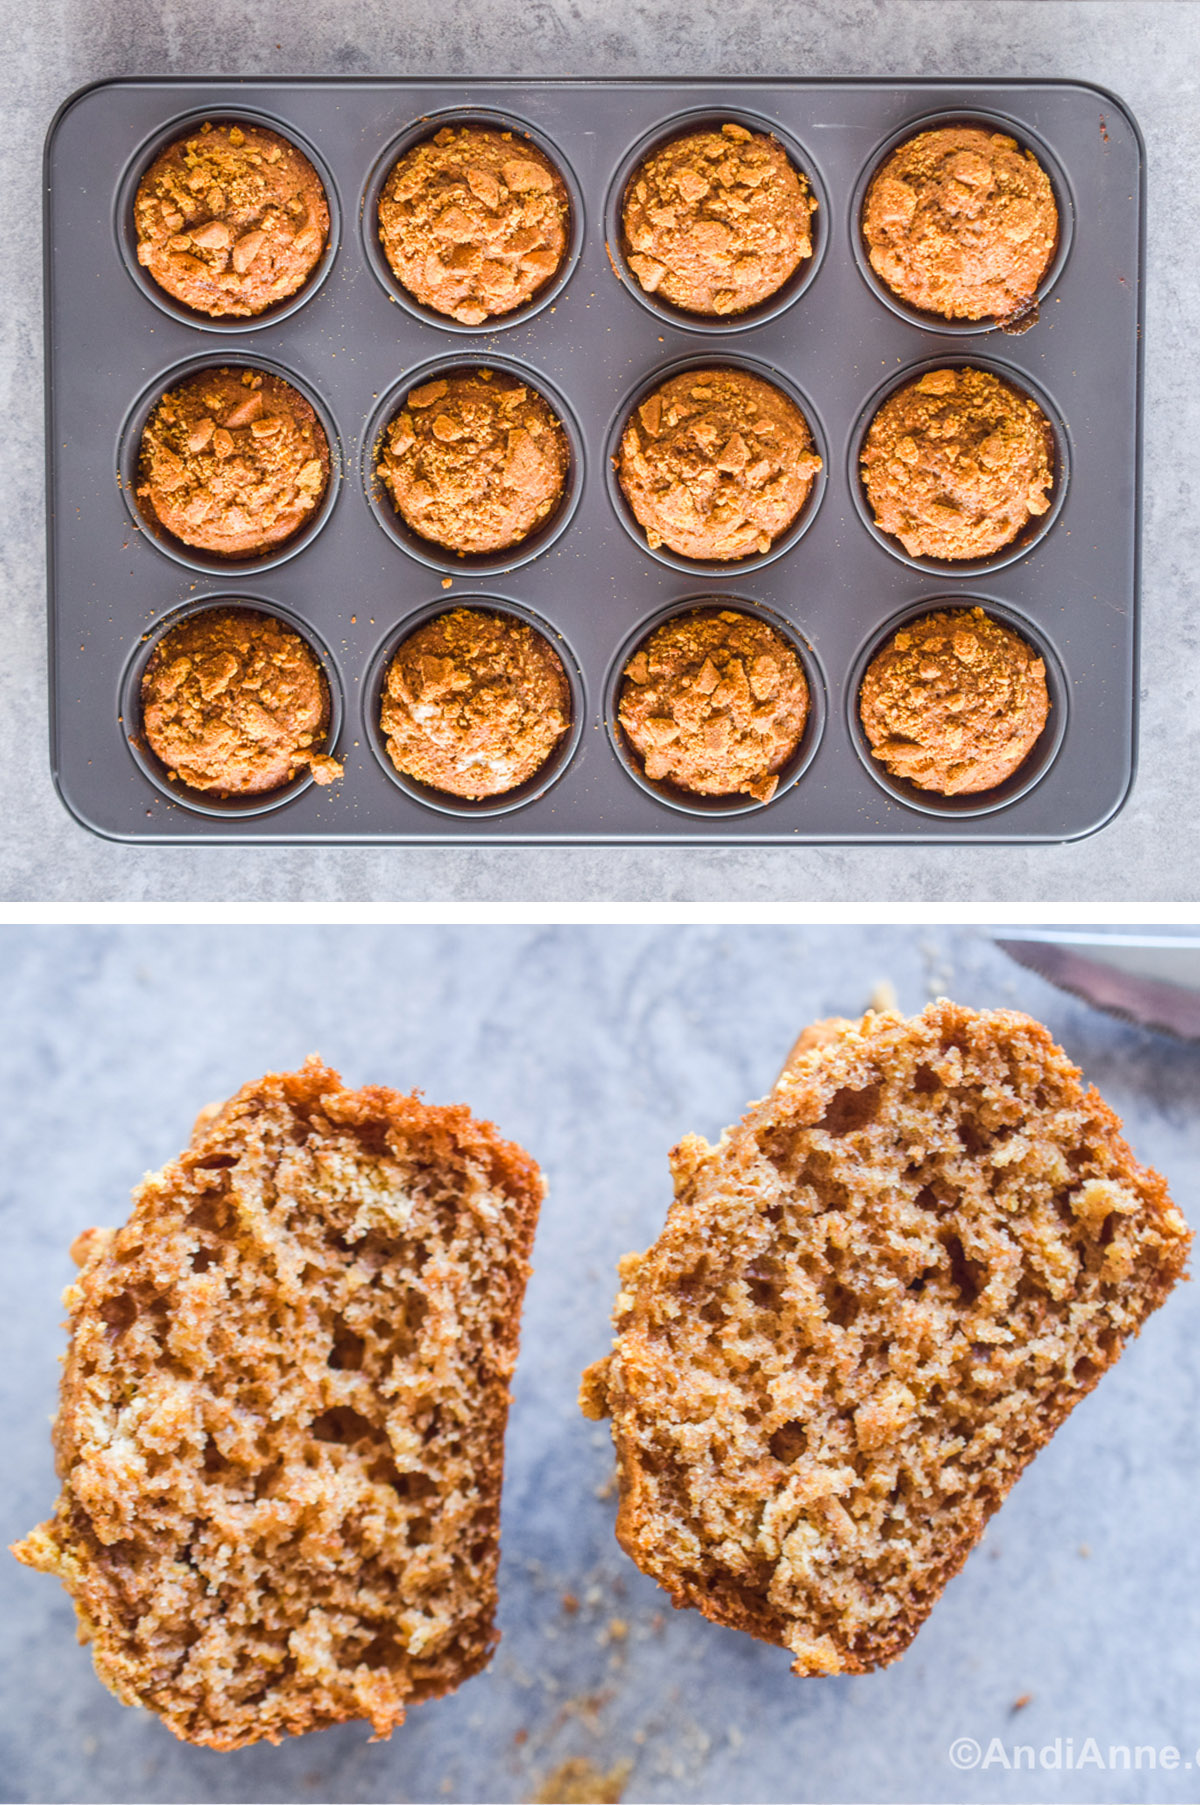 Muffin pan with baked muffins inside, and one muffin cut in half.